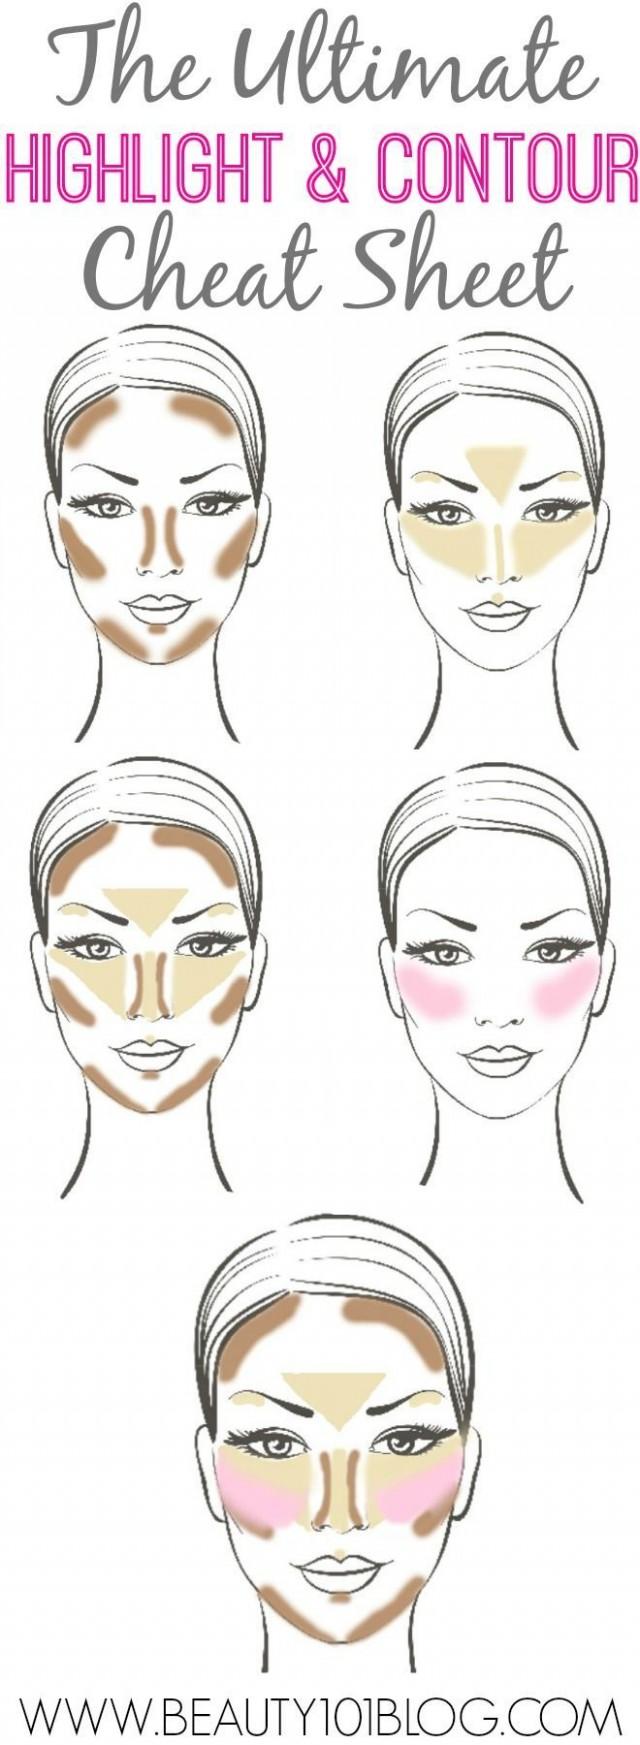 The Ultimate Highlight & Contour Cheat Sheet!